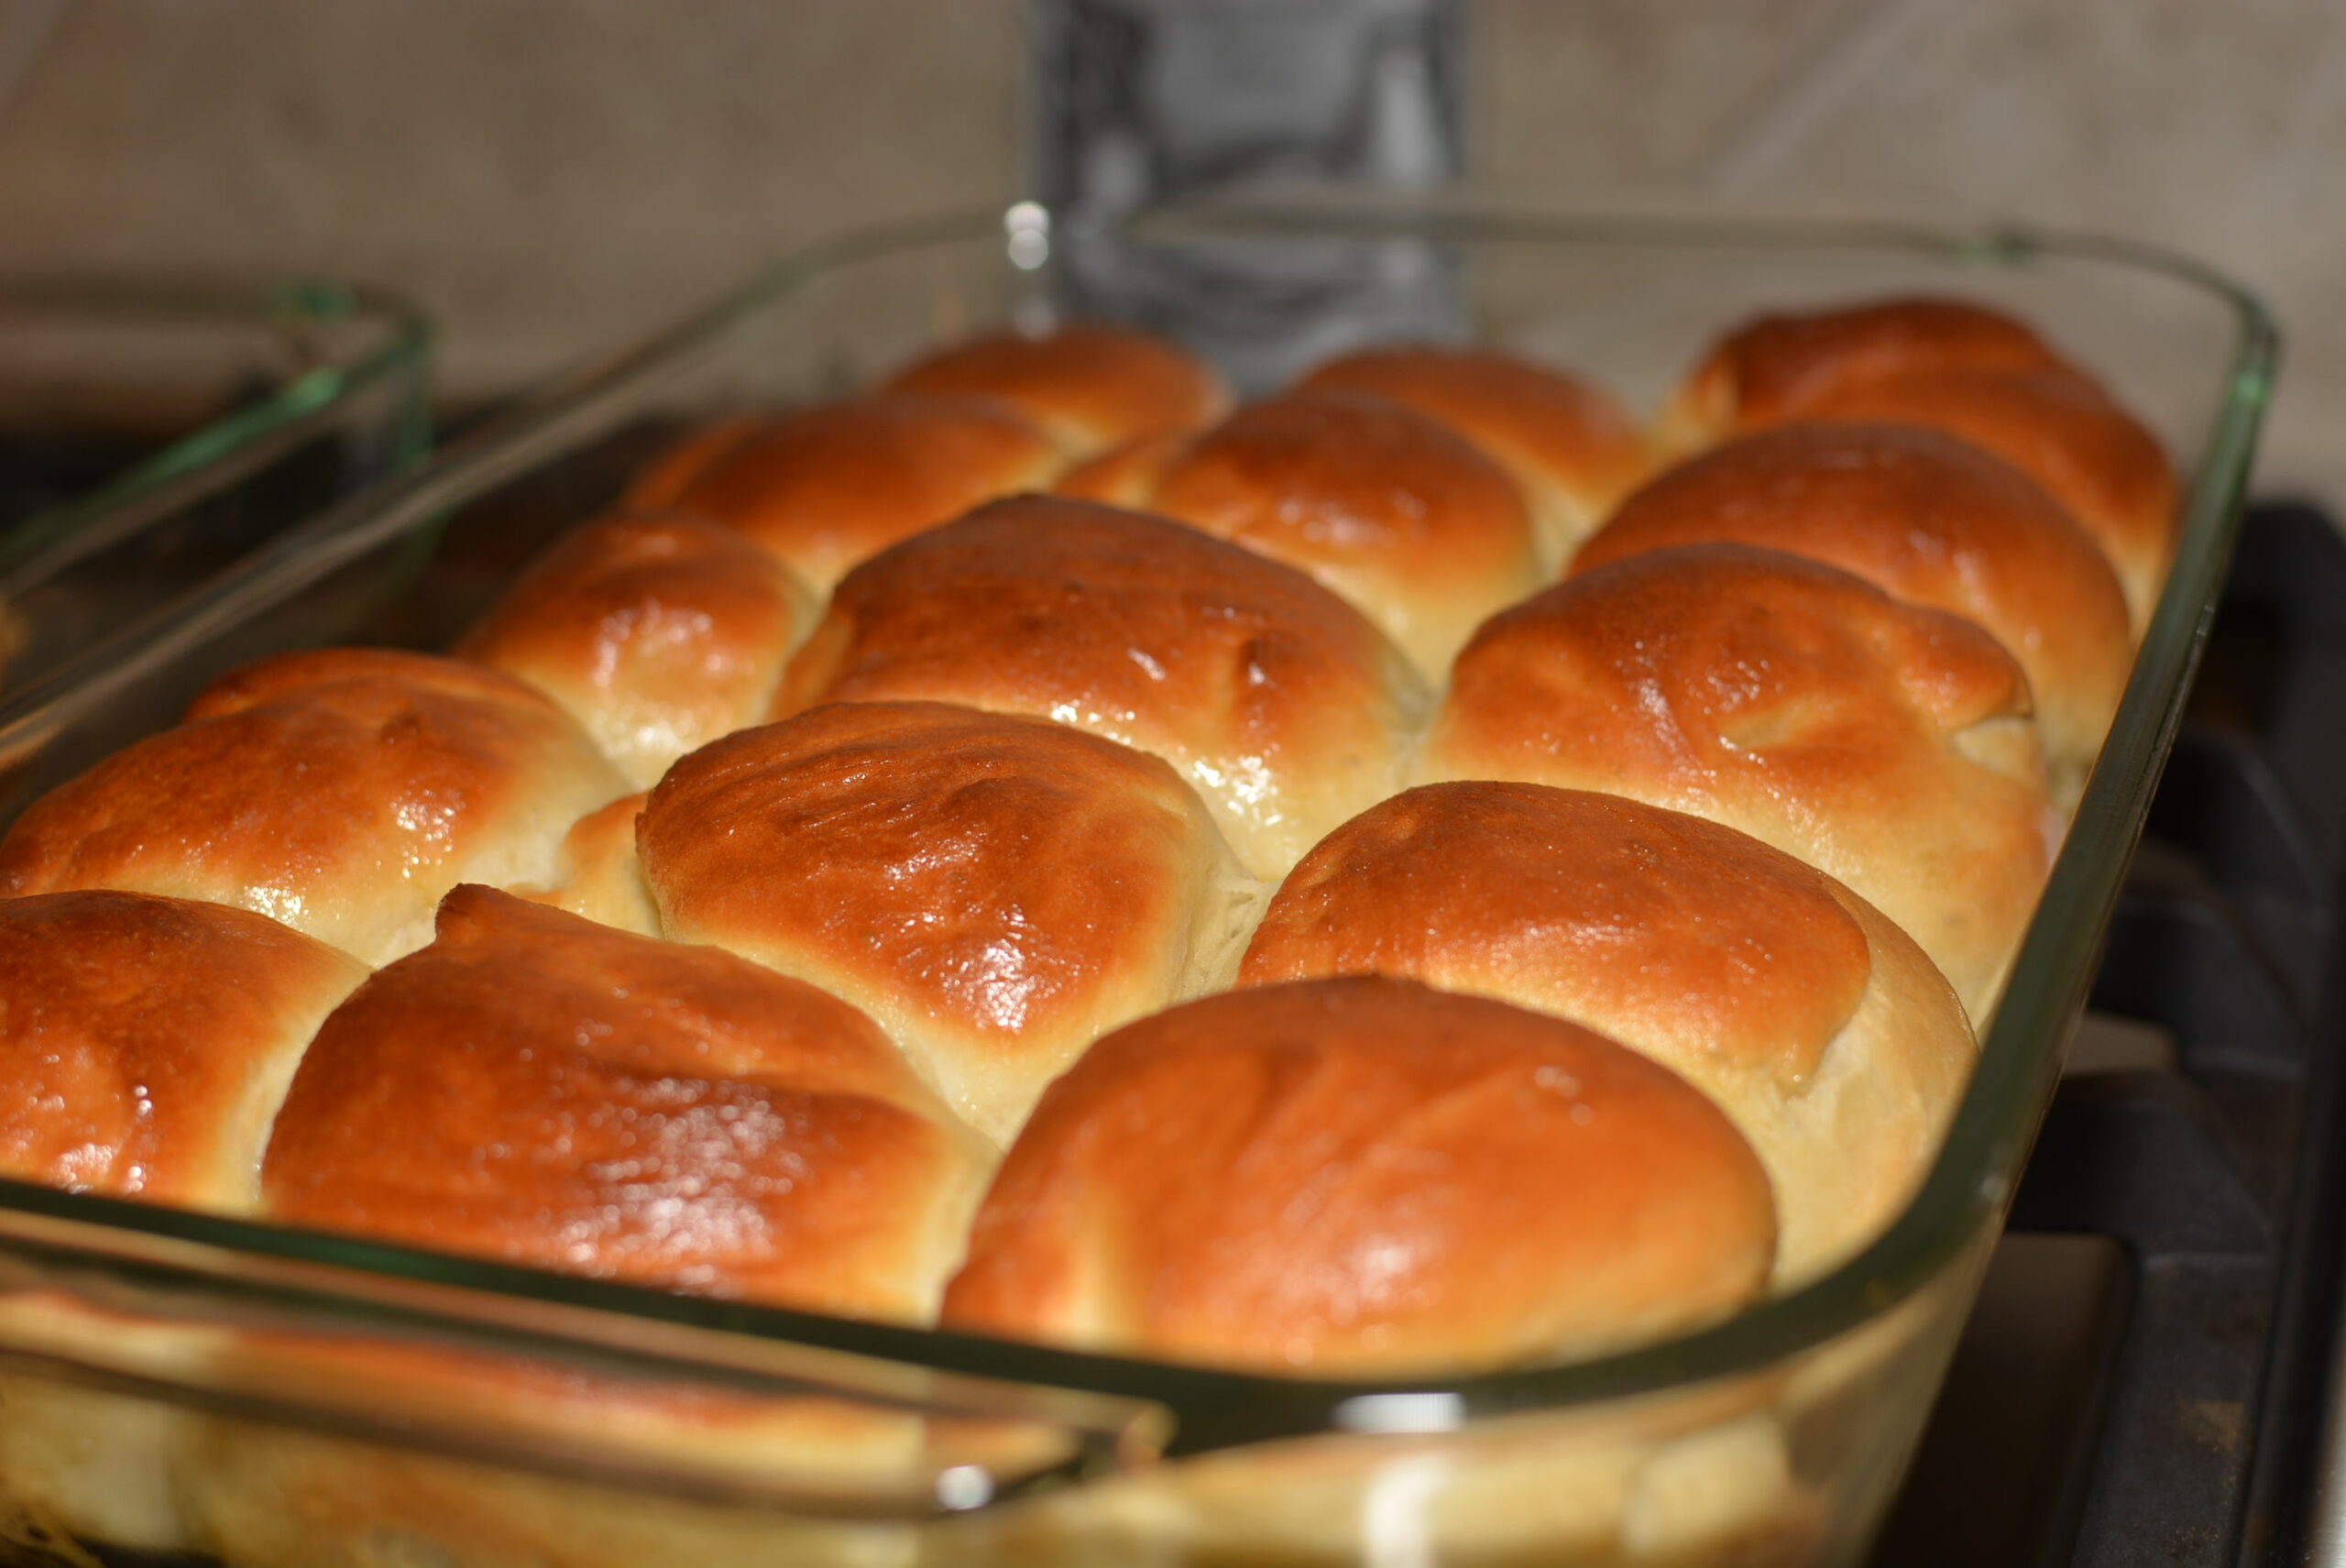 fluffy dinner rolls baked in a 9x13 baking dish and ready to enjoy.